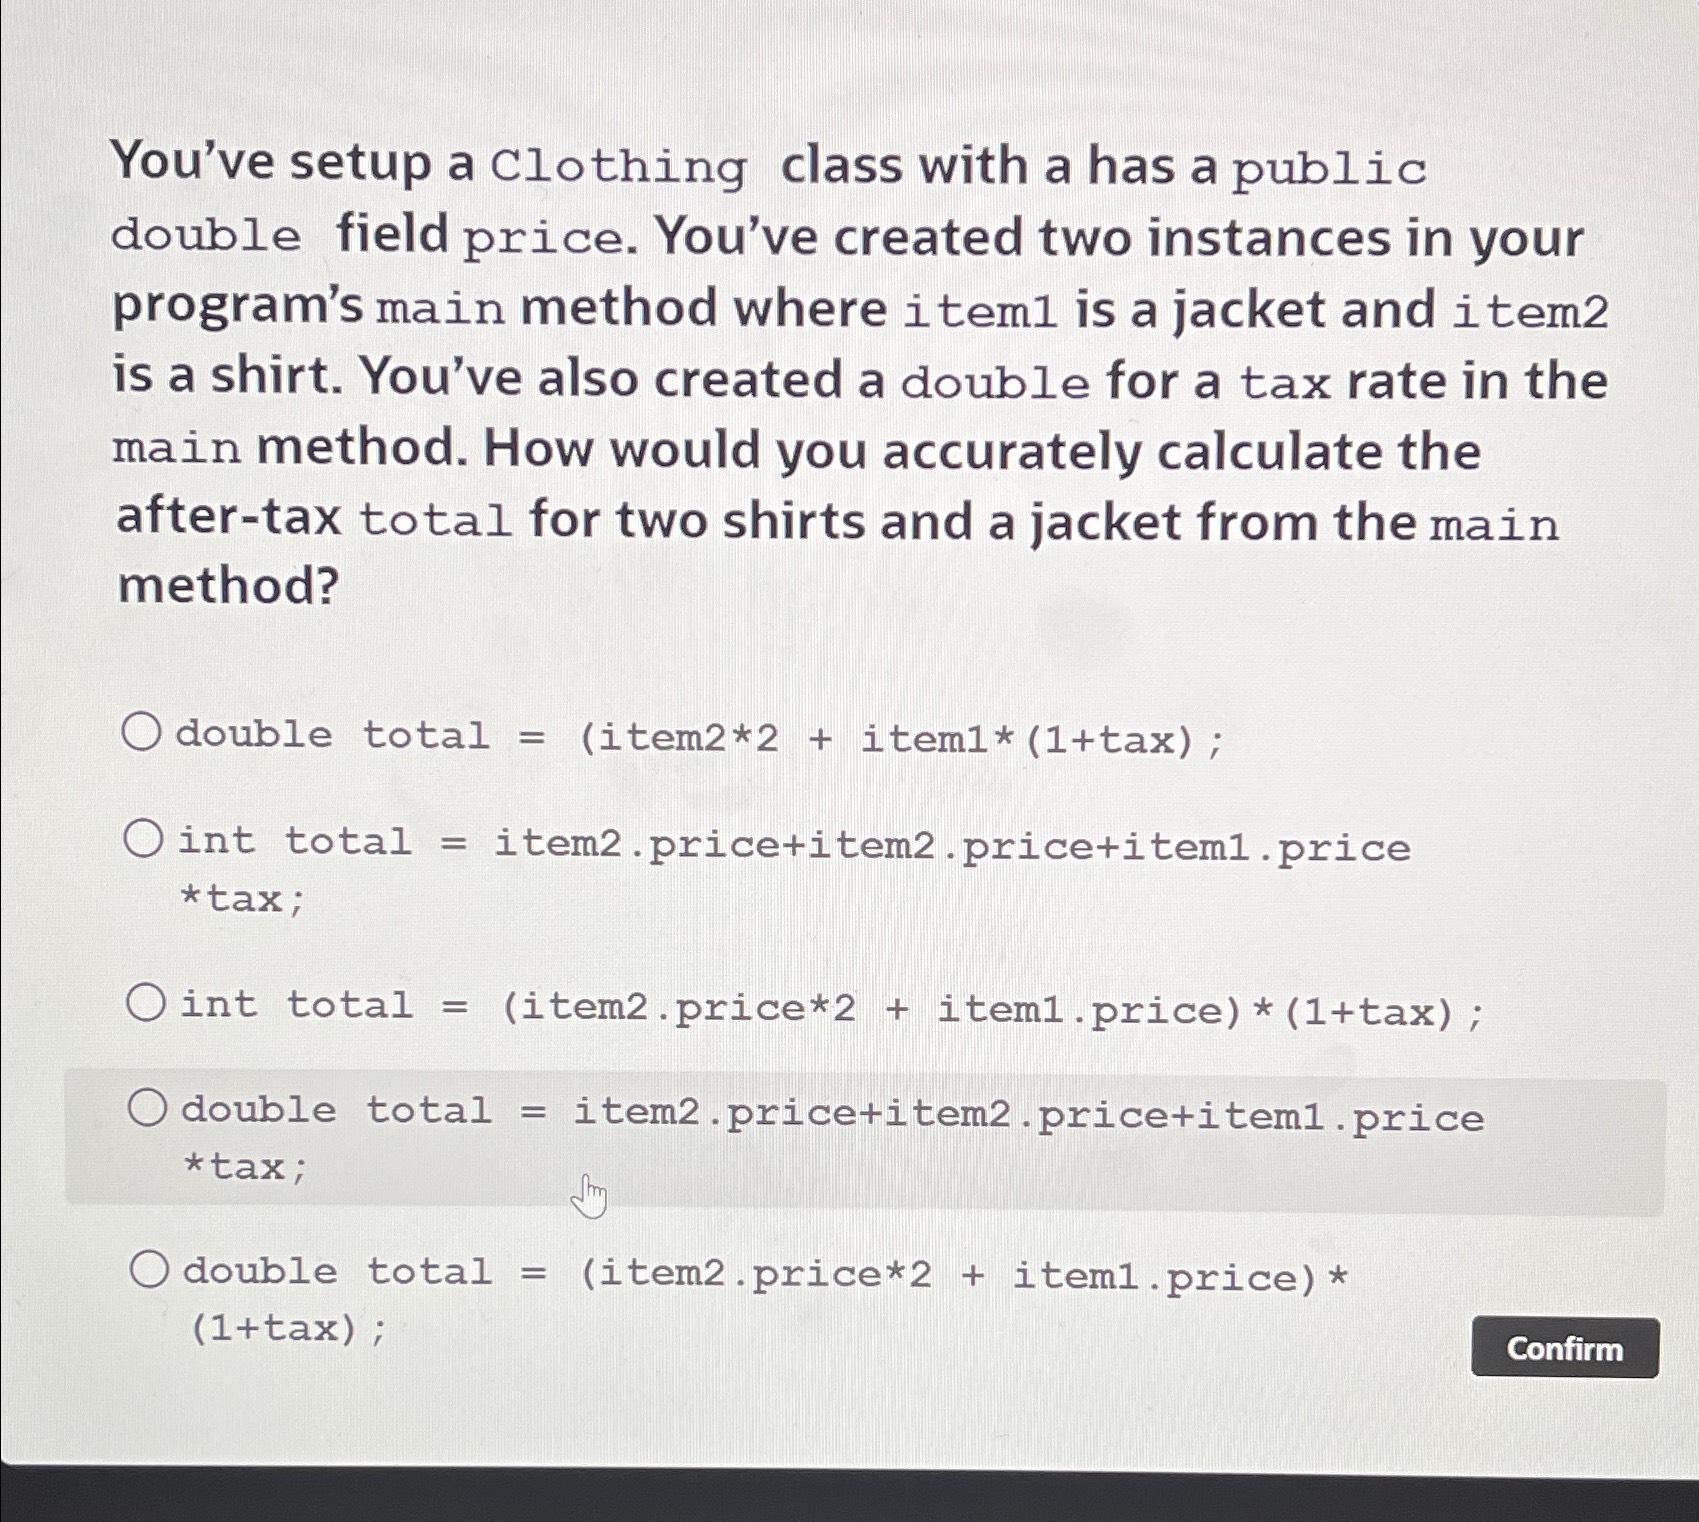 You've setup a Clothing class with a has a public double field price. You've created two instances in your